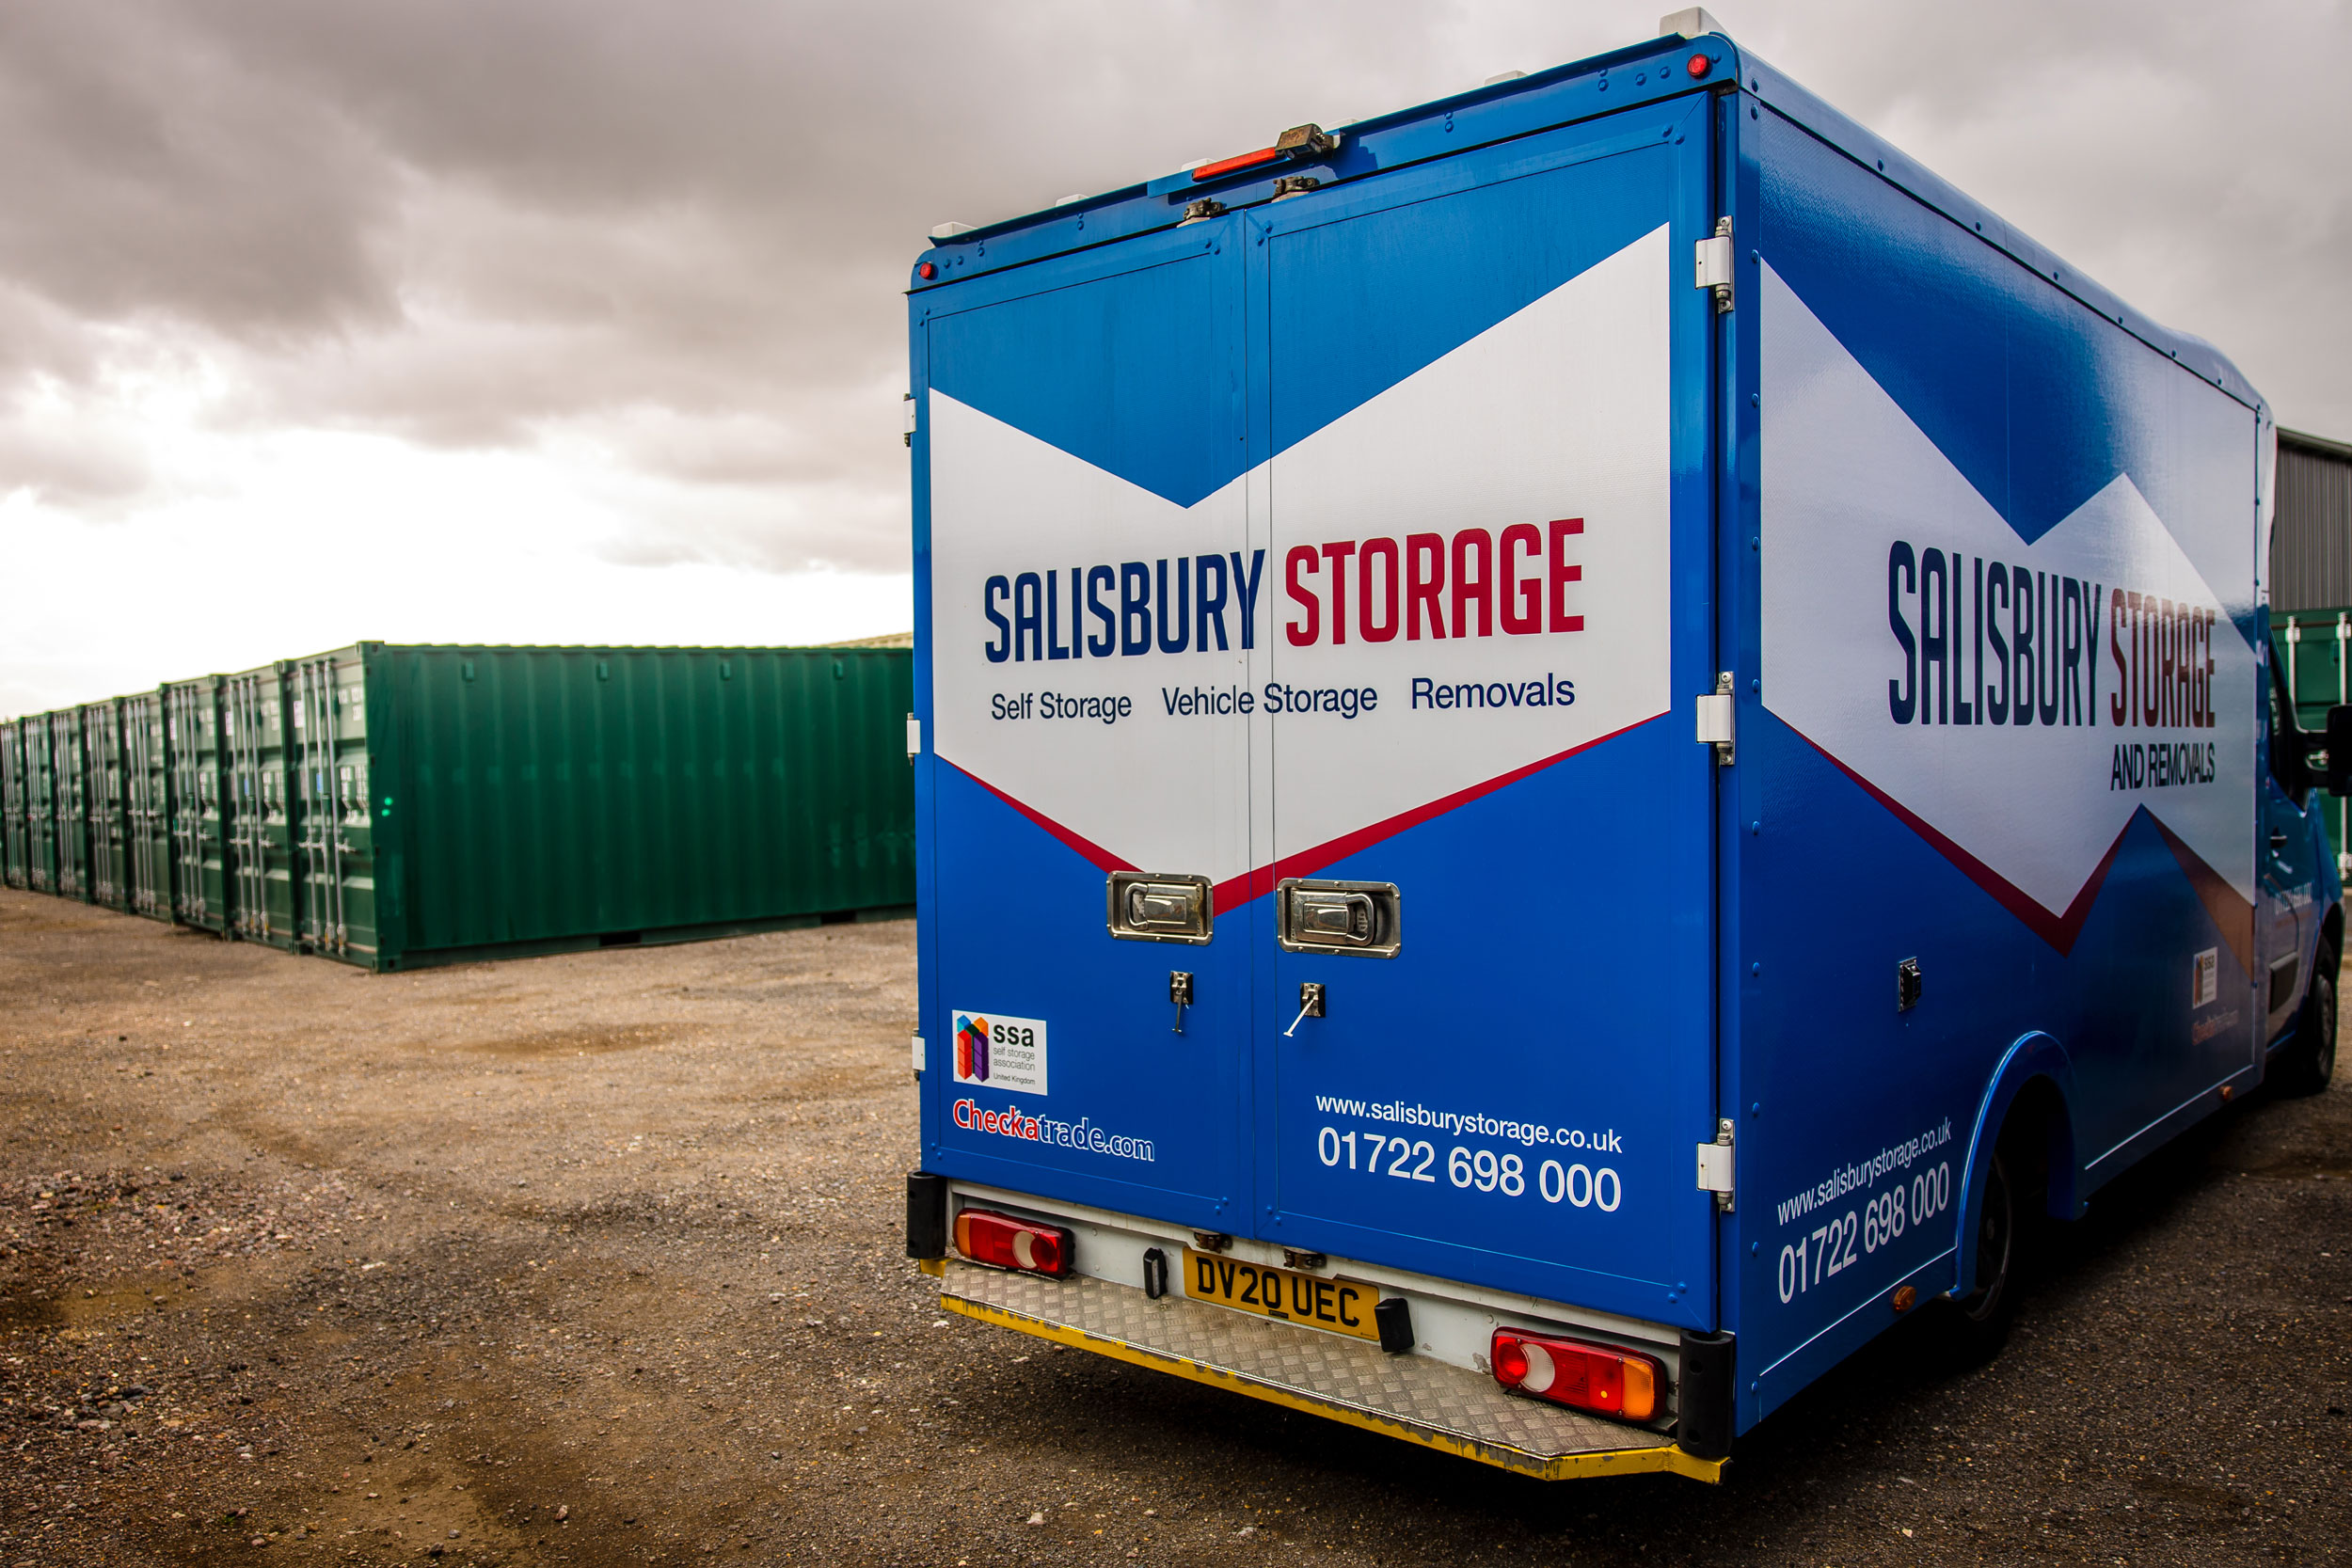 A blue storage lorry, prominently displaying the word "salisbury storage", stands out in its size and colour in front of storage containers.